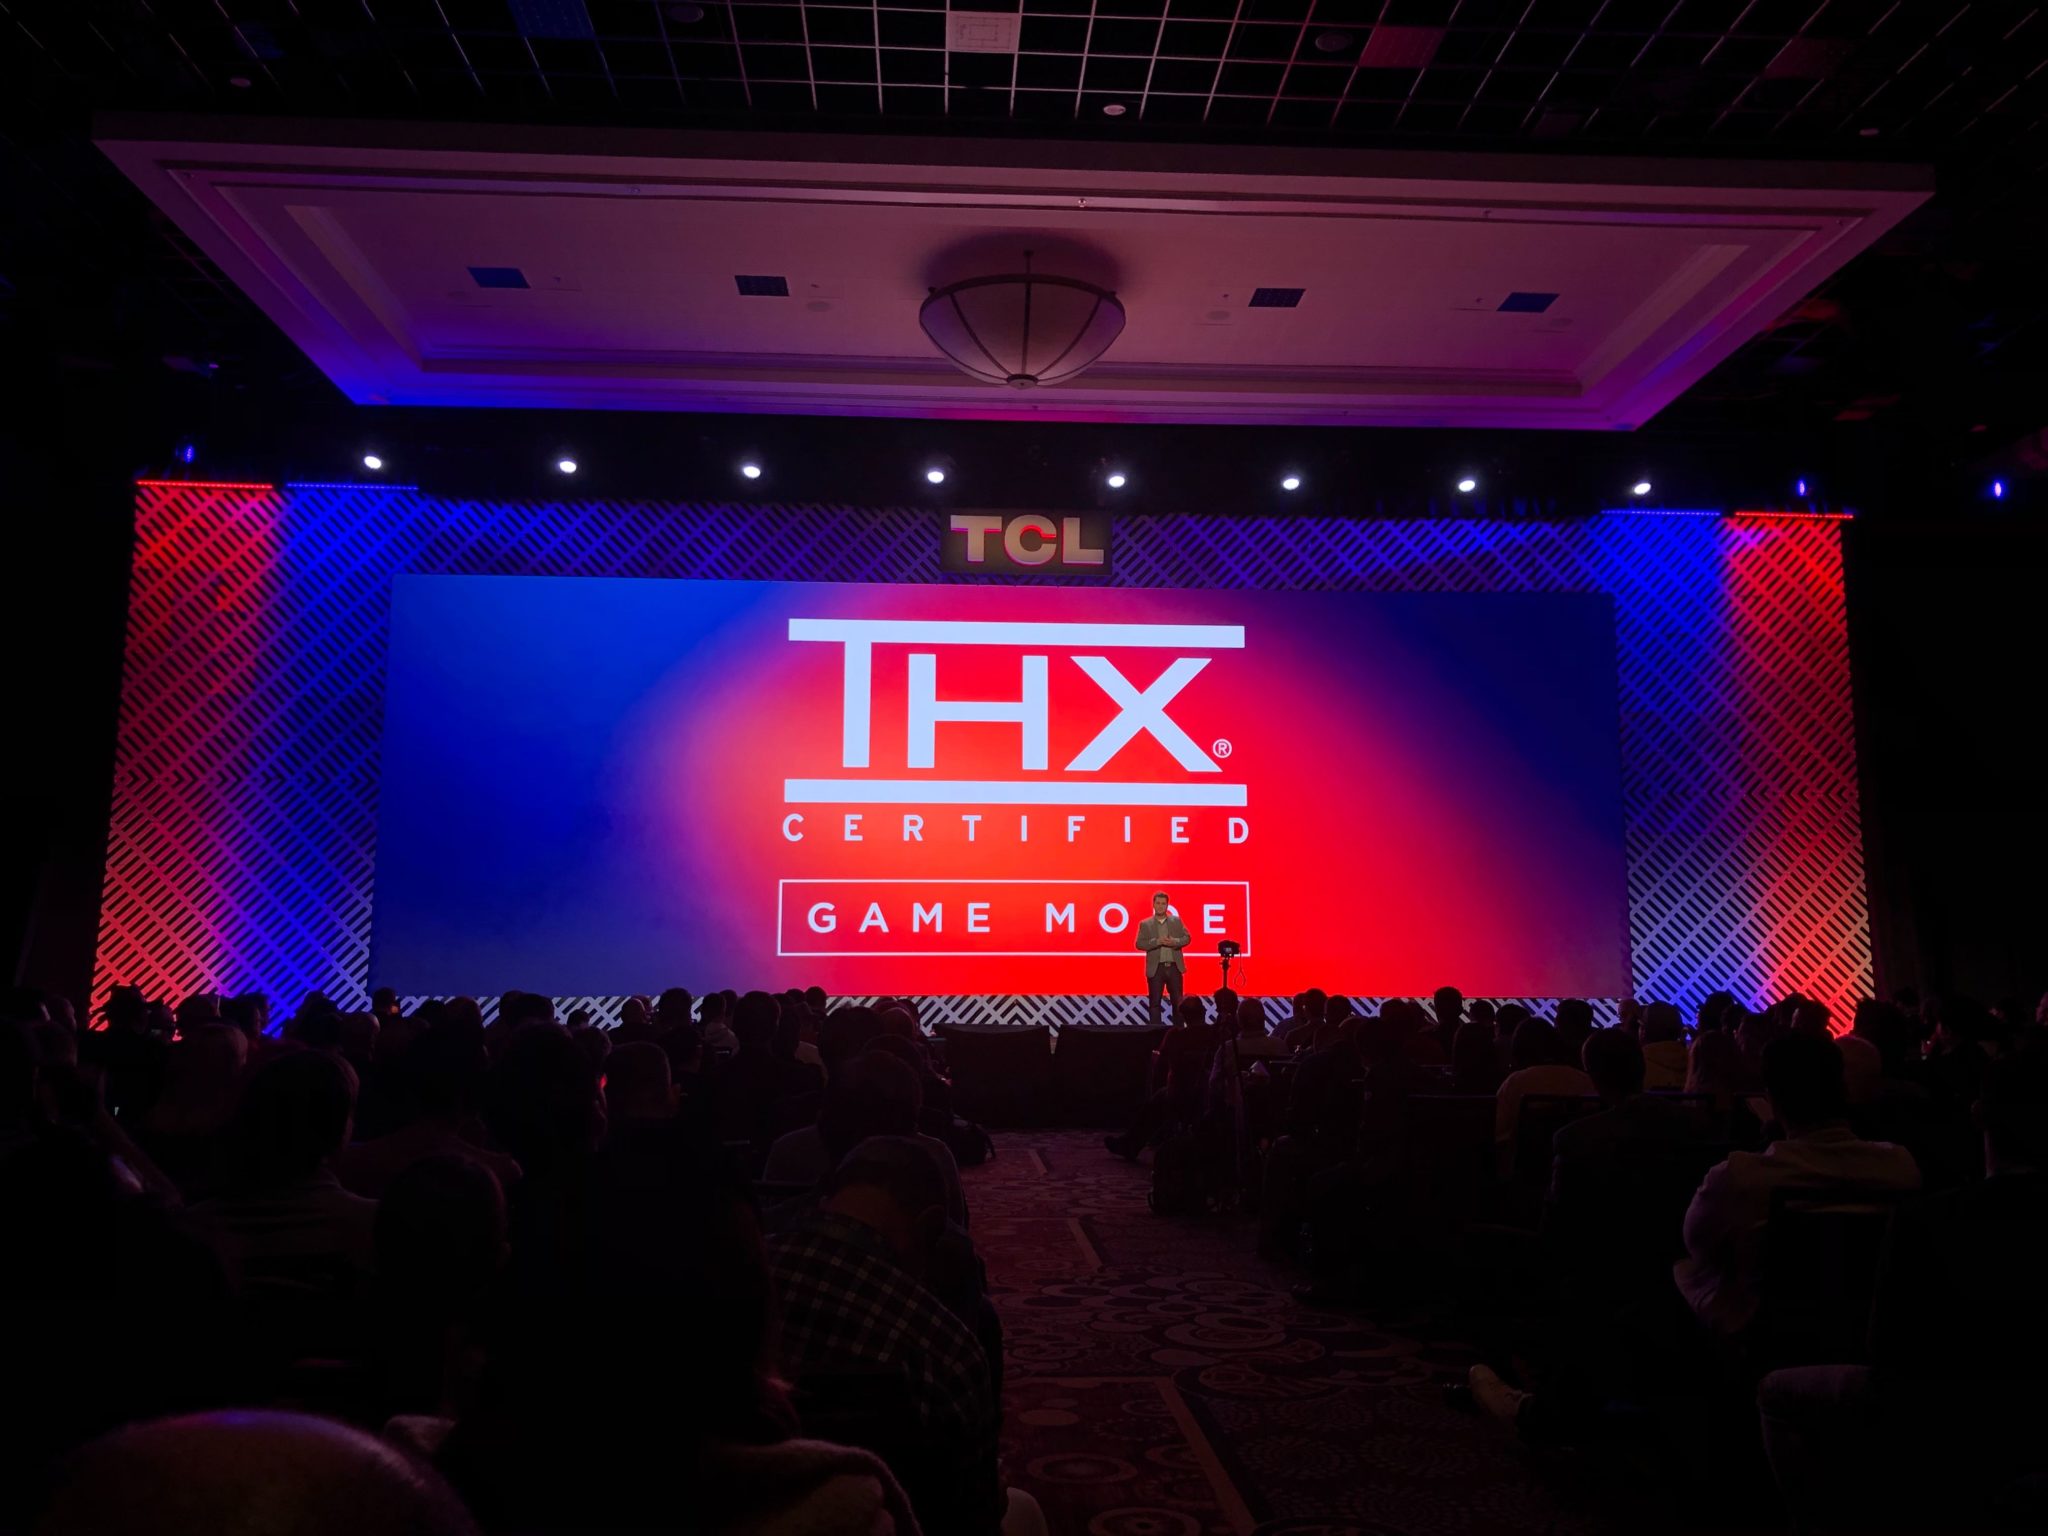 TCL TV with THX Certified Game Mode announcement